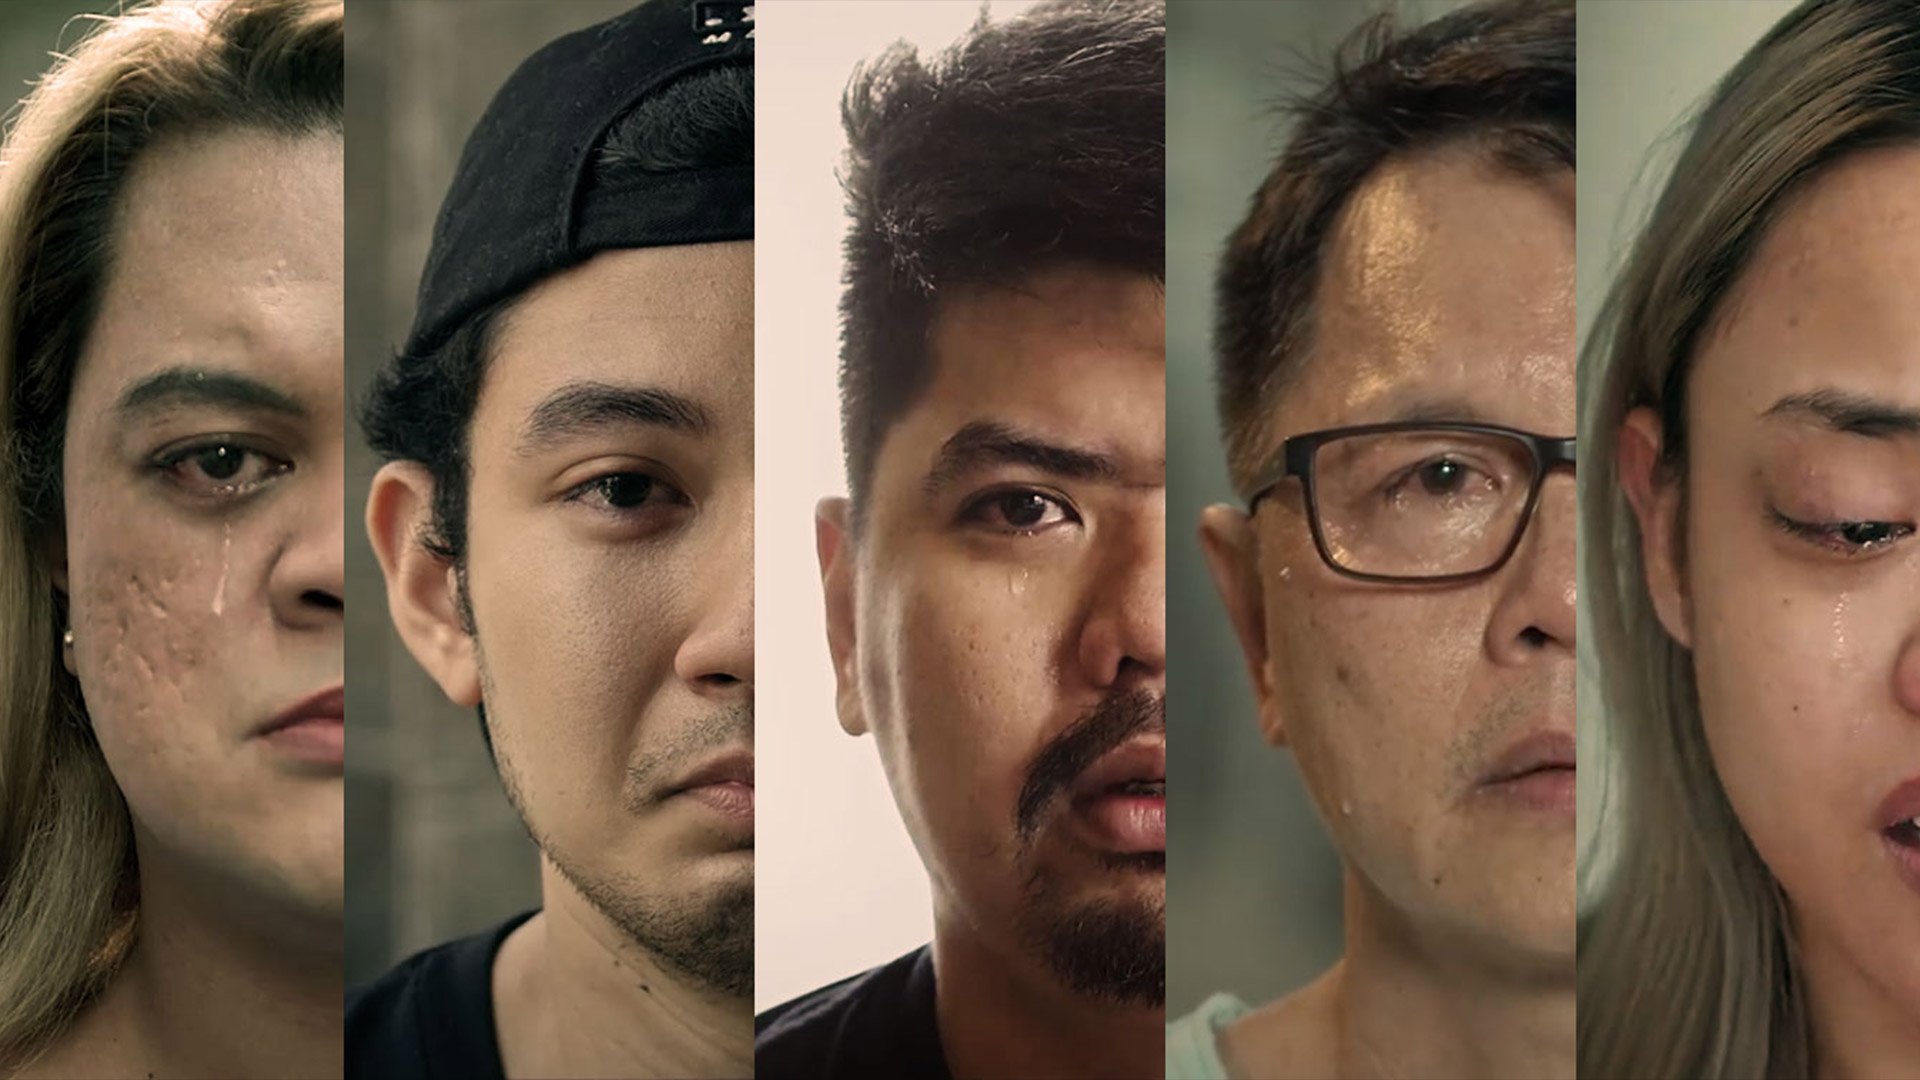 GIGIL rallies comedians to stand up for the issue of mental health